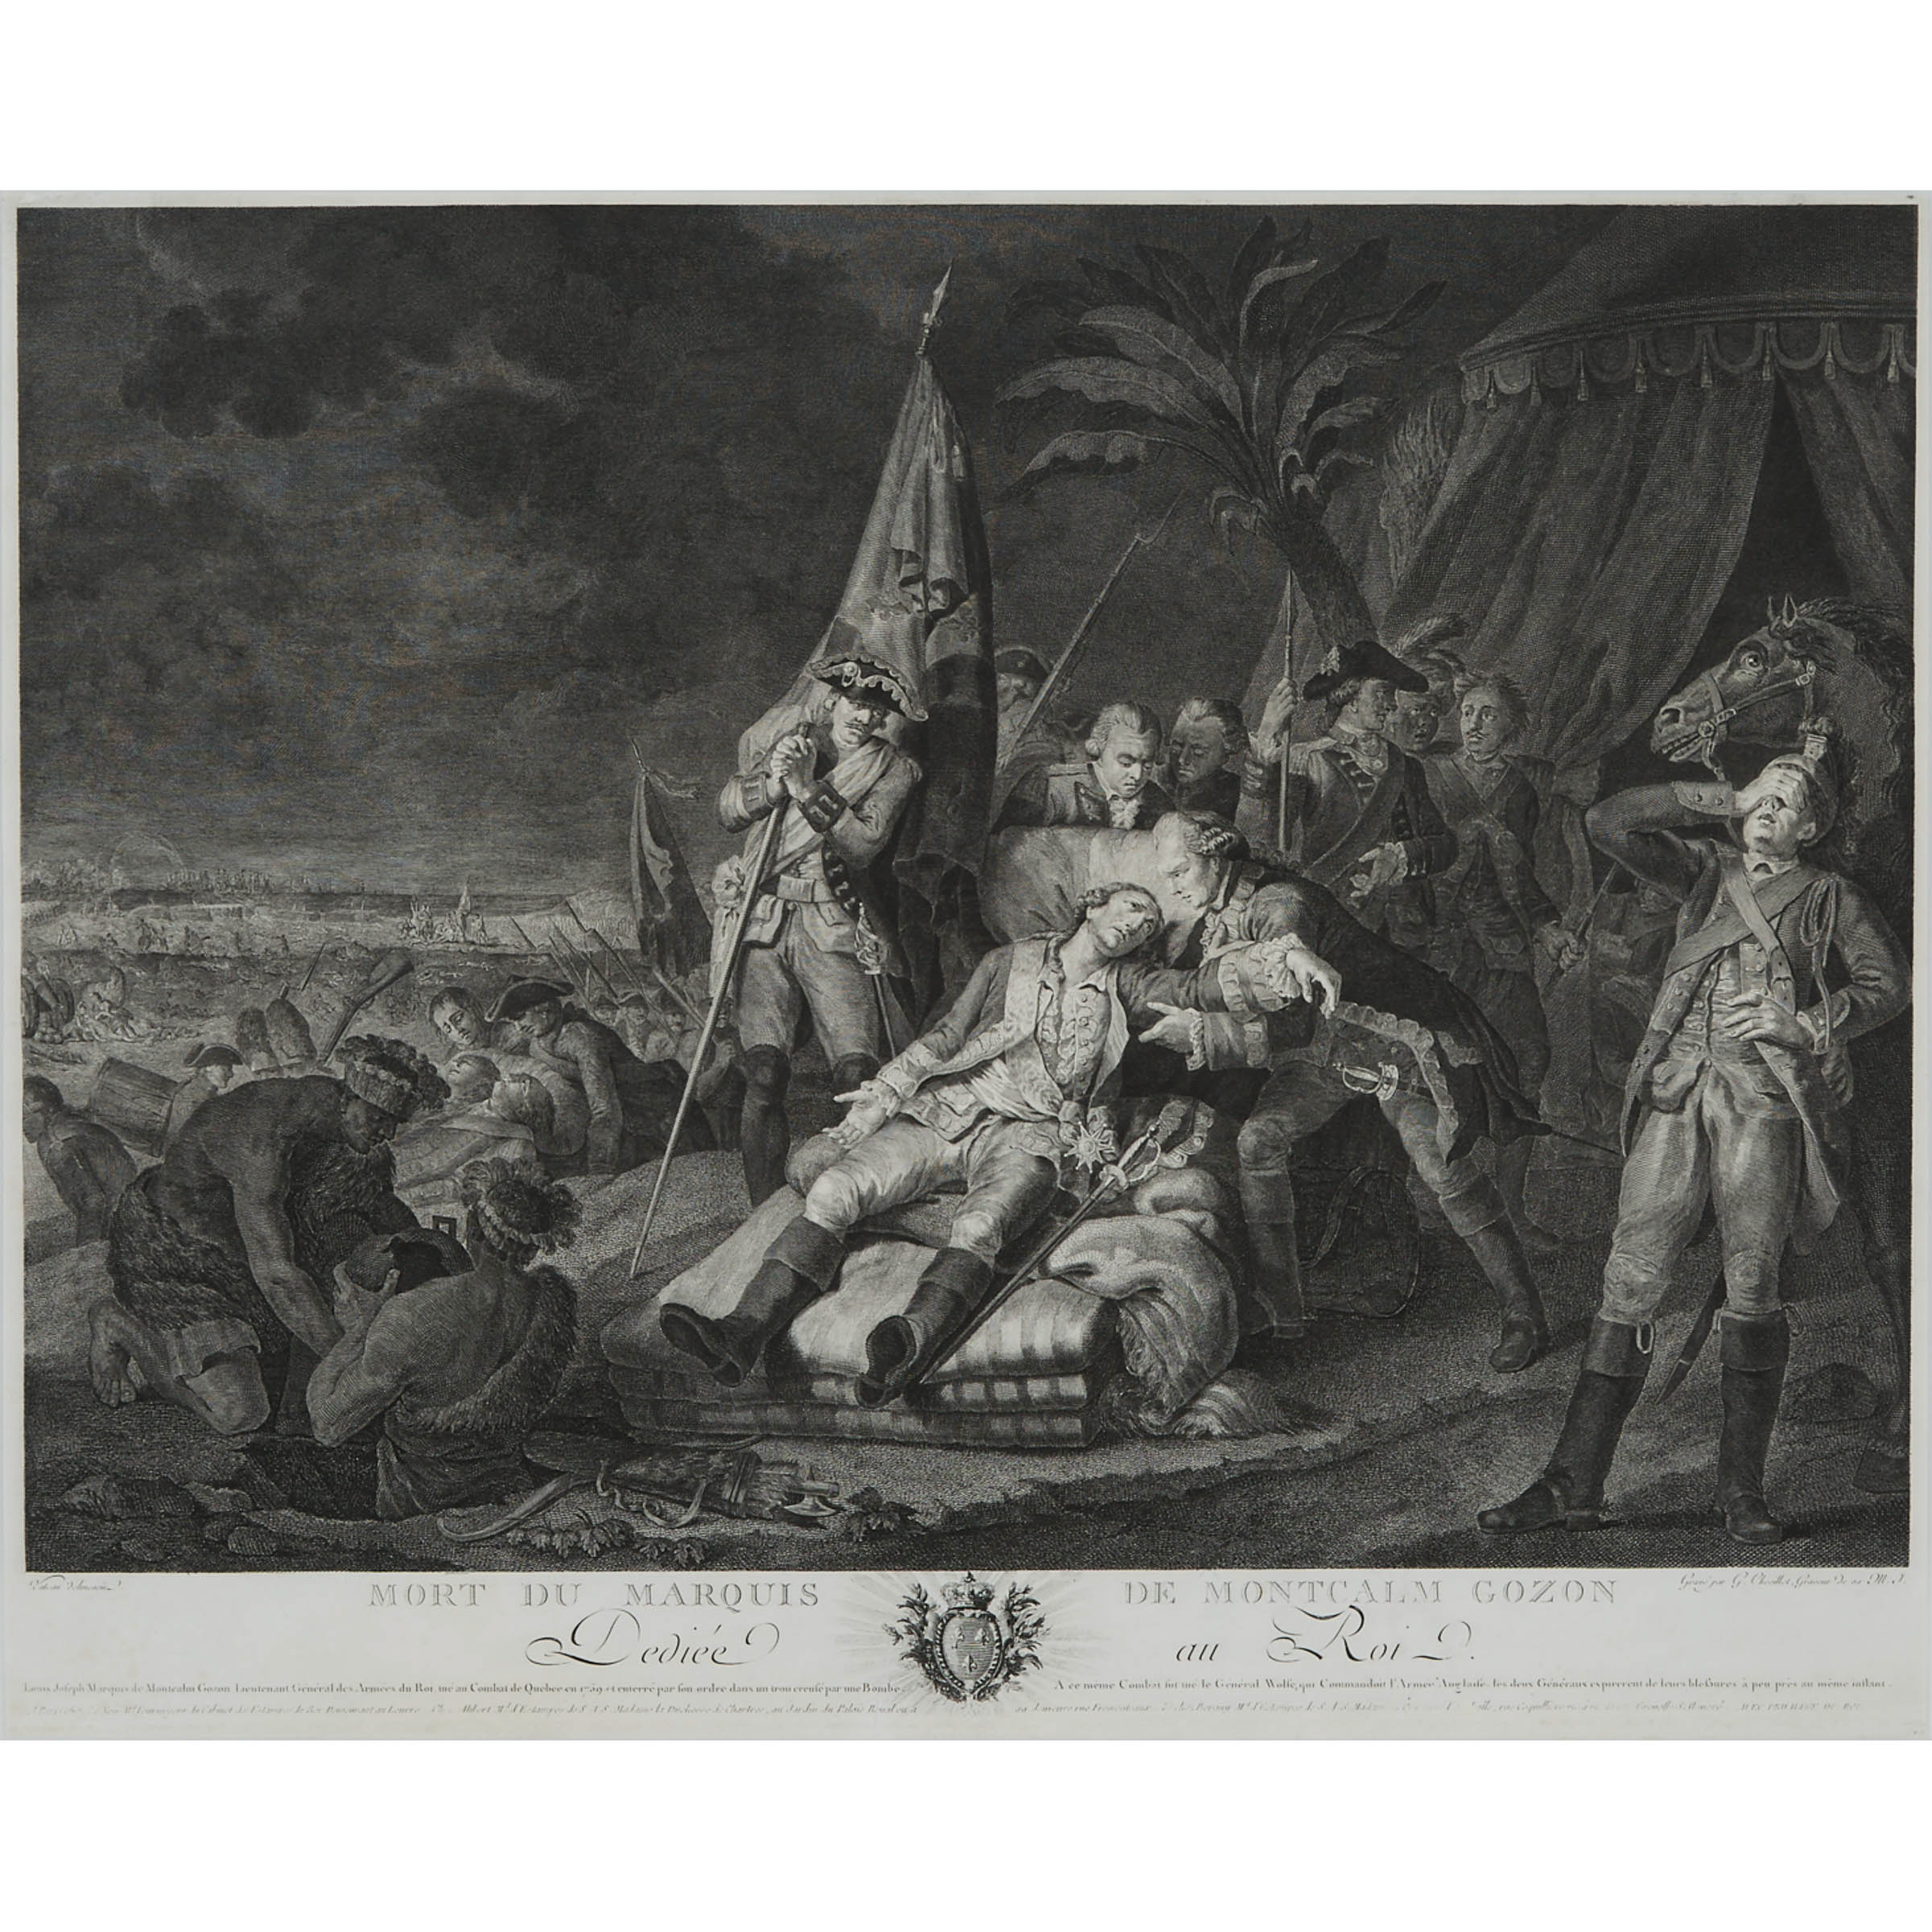 Pair of Engravings: The Death of General Wolfe and Mort du Marquis de Montcalm Gozon, 18th century